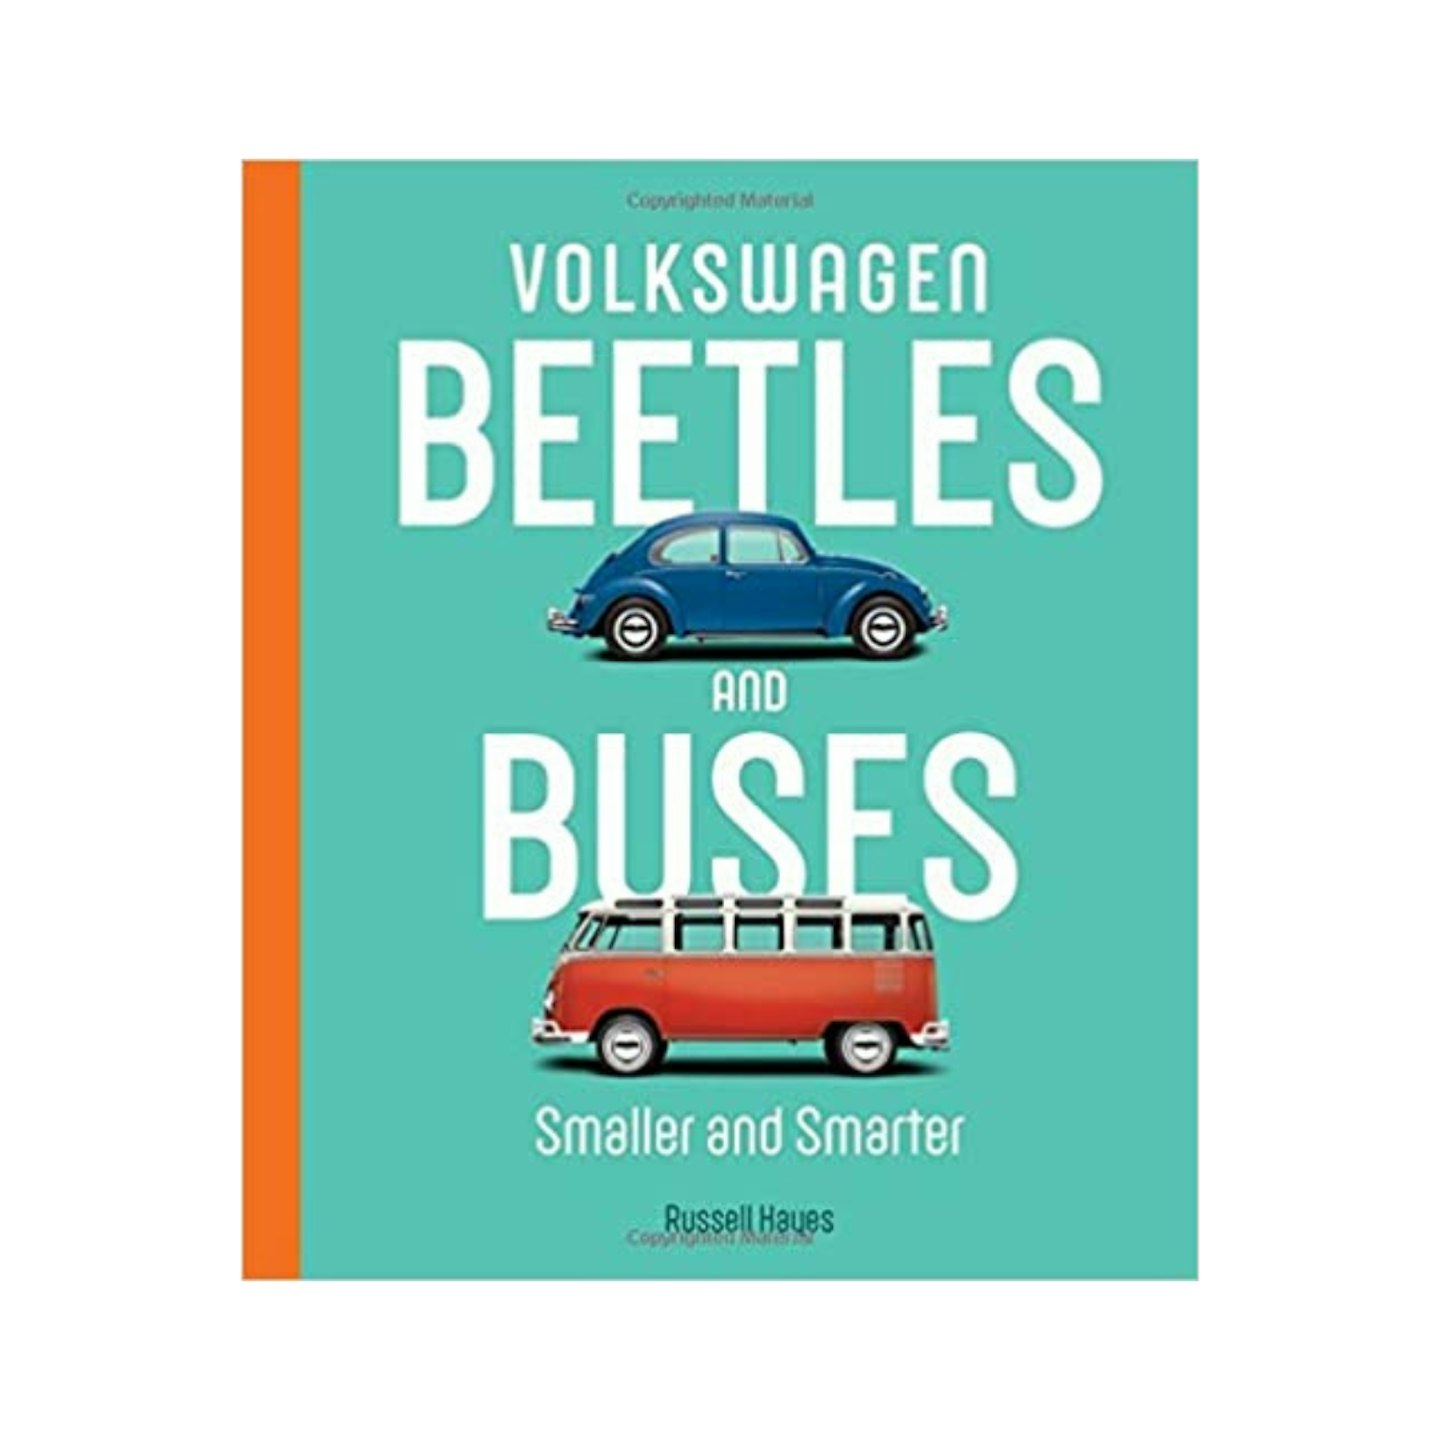 Volkswagen Beetles and Buses: Smaller and Smarter